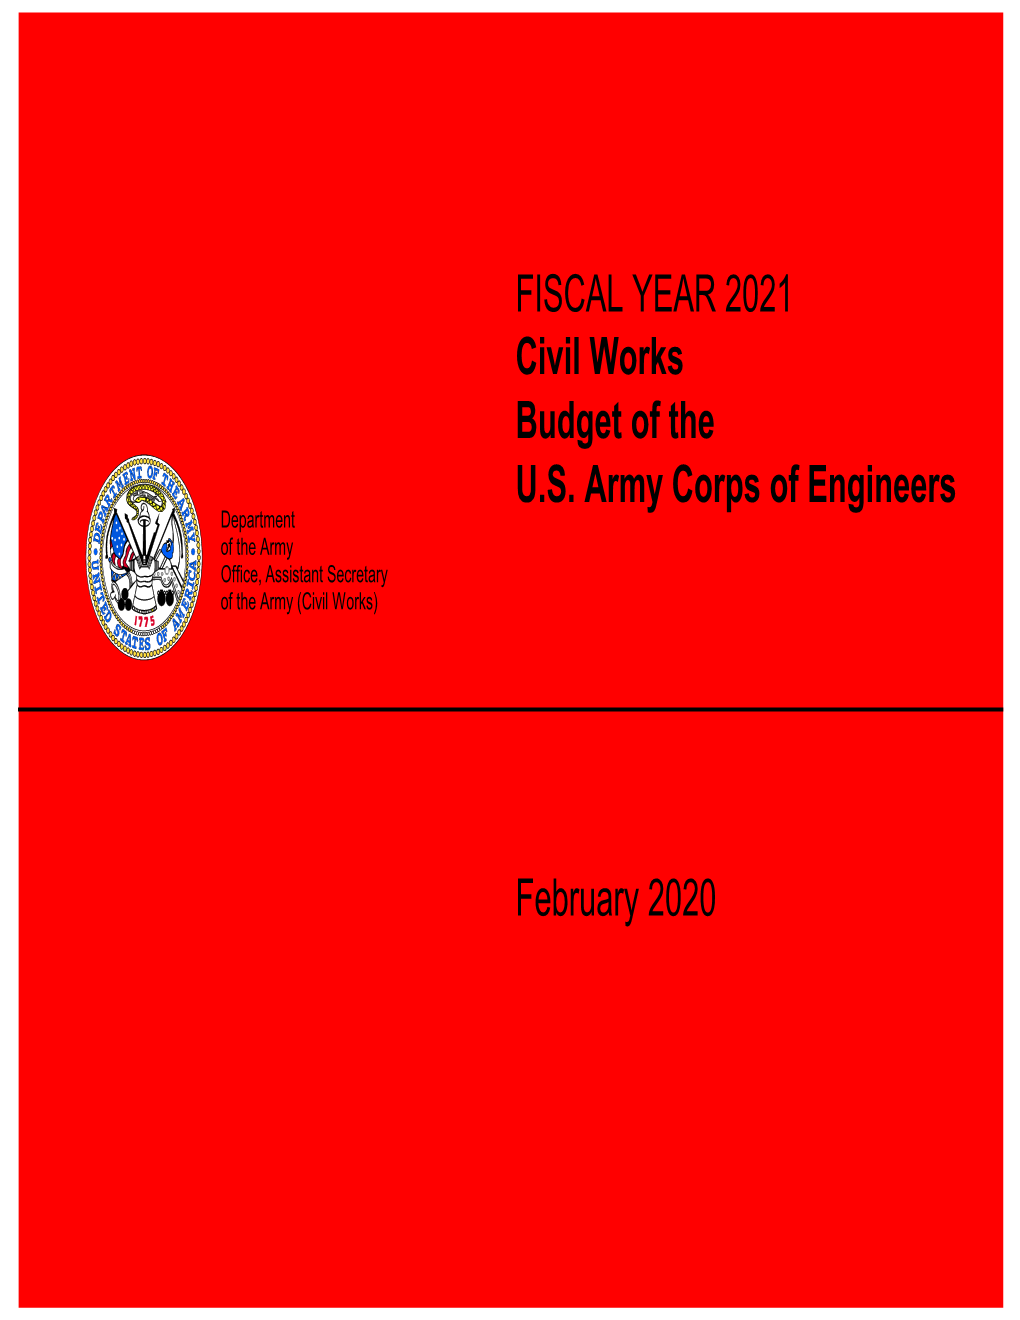 Civil Works Budget of the U.S. Army Corps of Engineers, Fiscal Year 2021